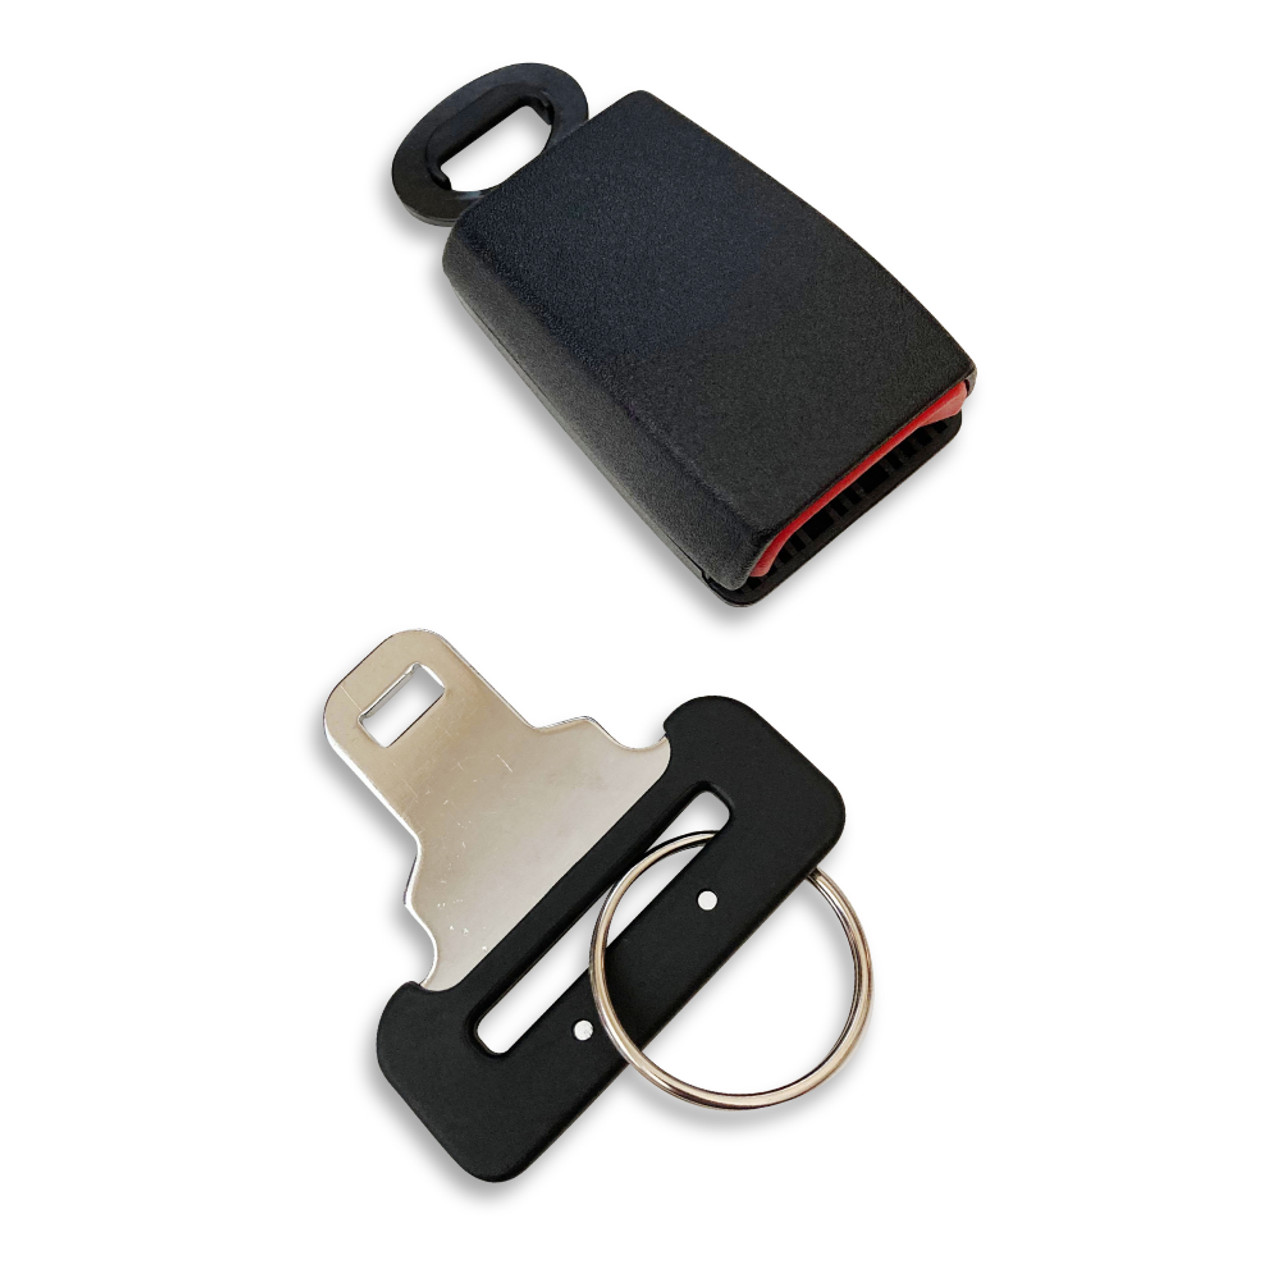 LEERLY Key Fob Cover for Cadillac Accessories, Key Case with Key